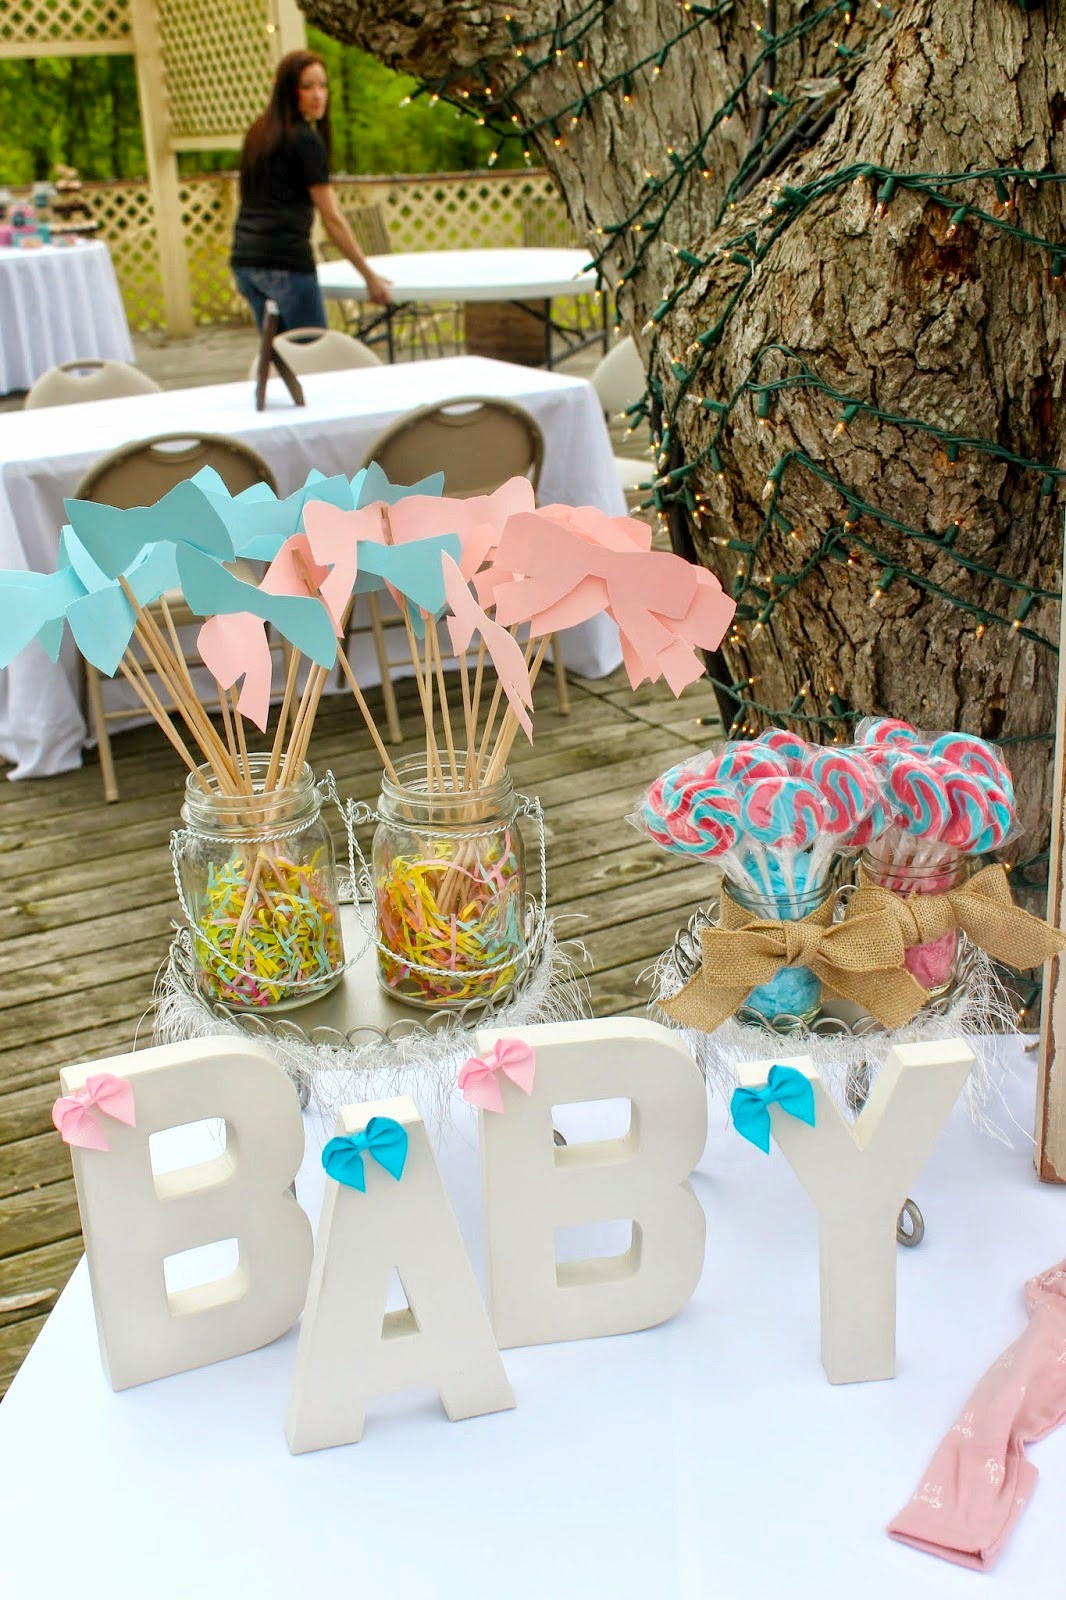 Decoration Ideas For Gender Reveal Party
 KEEP CALM AND CARRY ON Gender Reveal Party Pink or Blue 